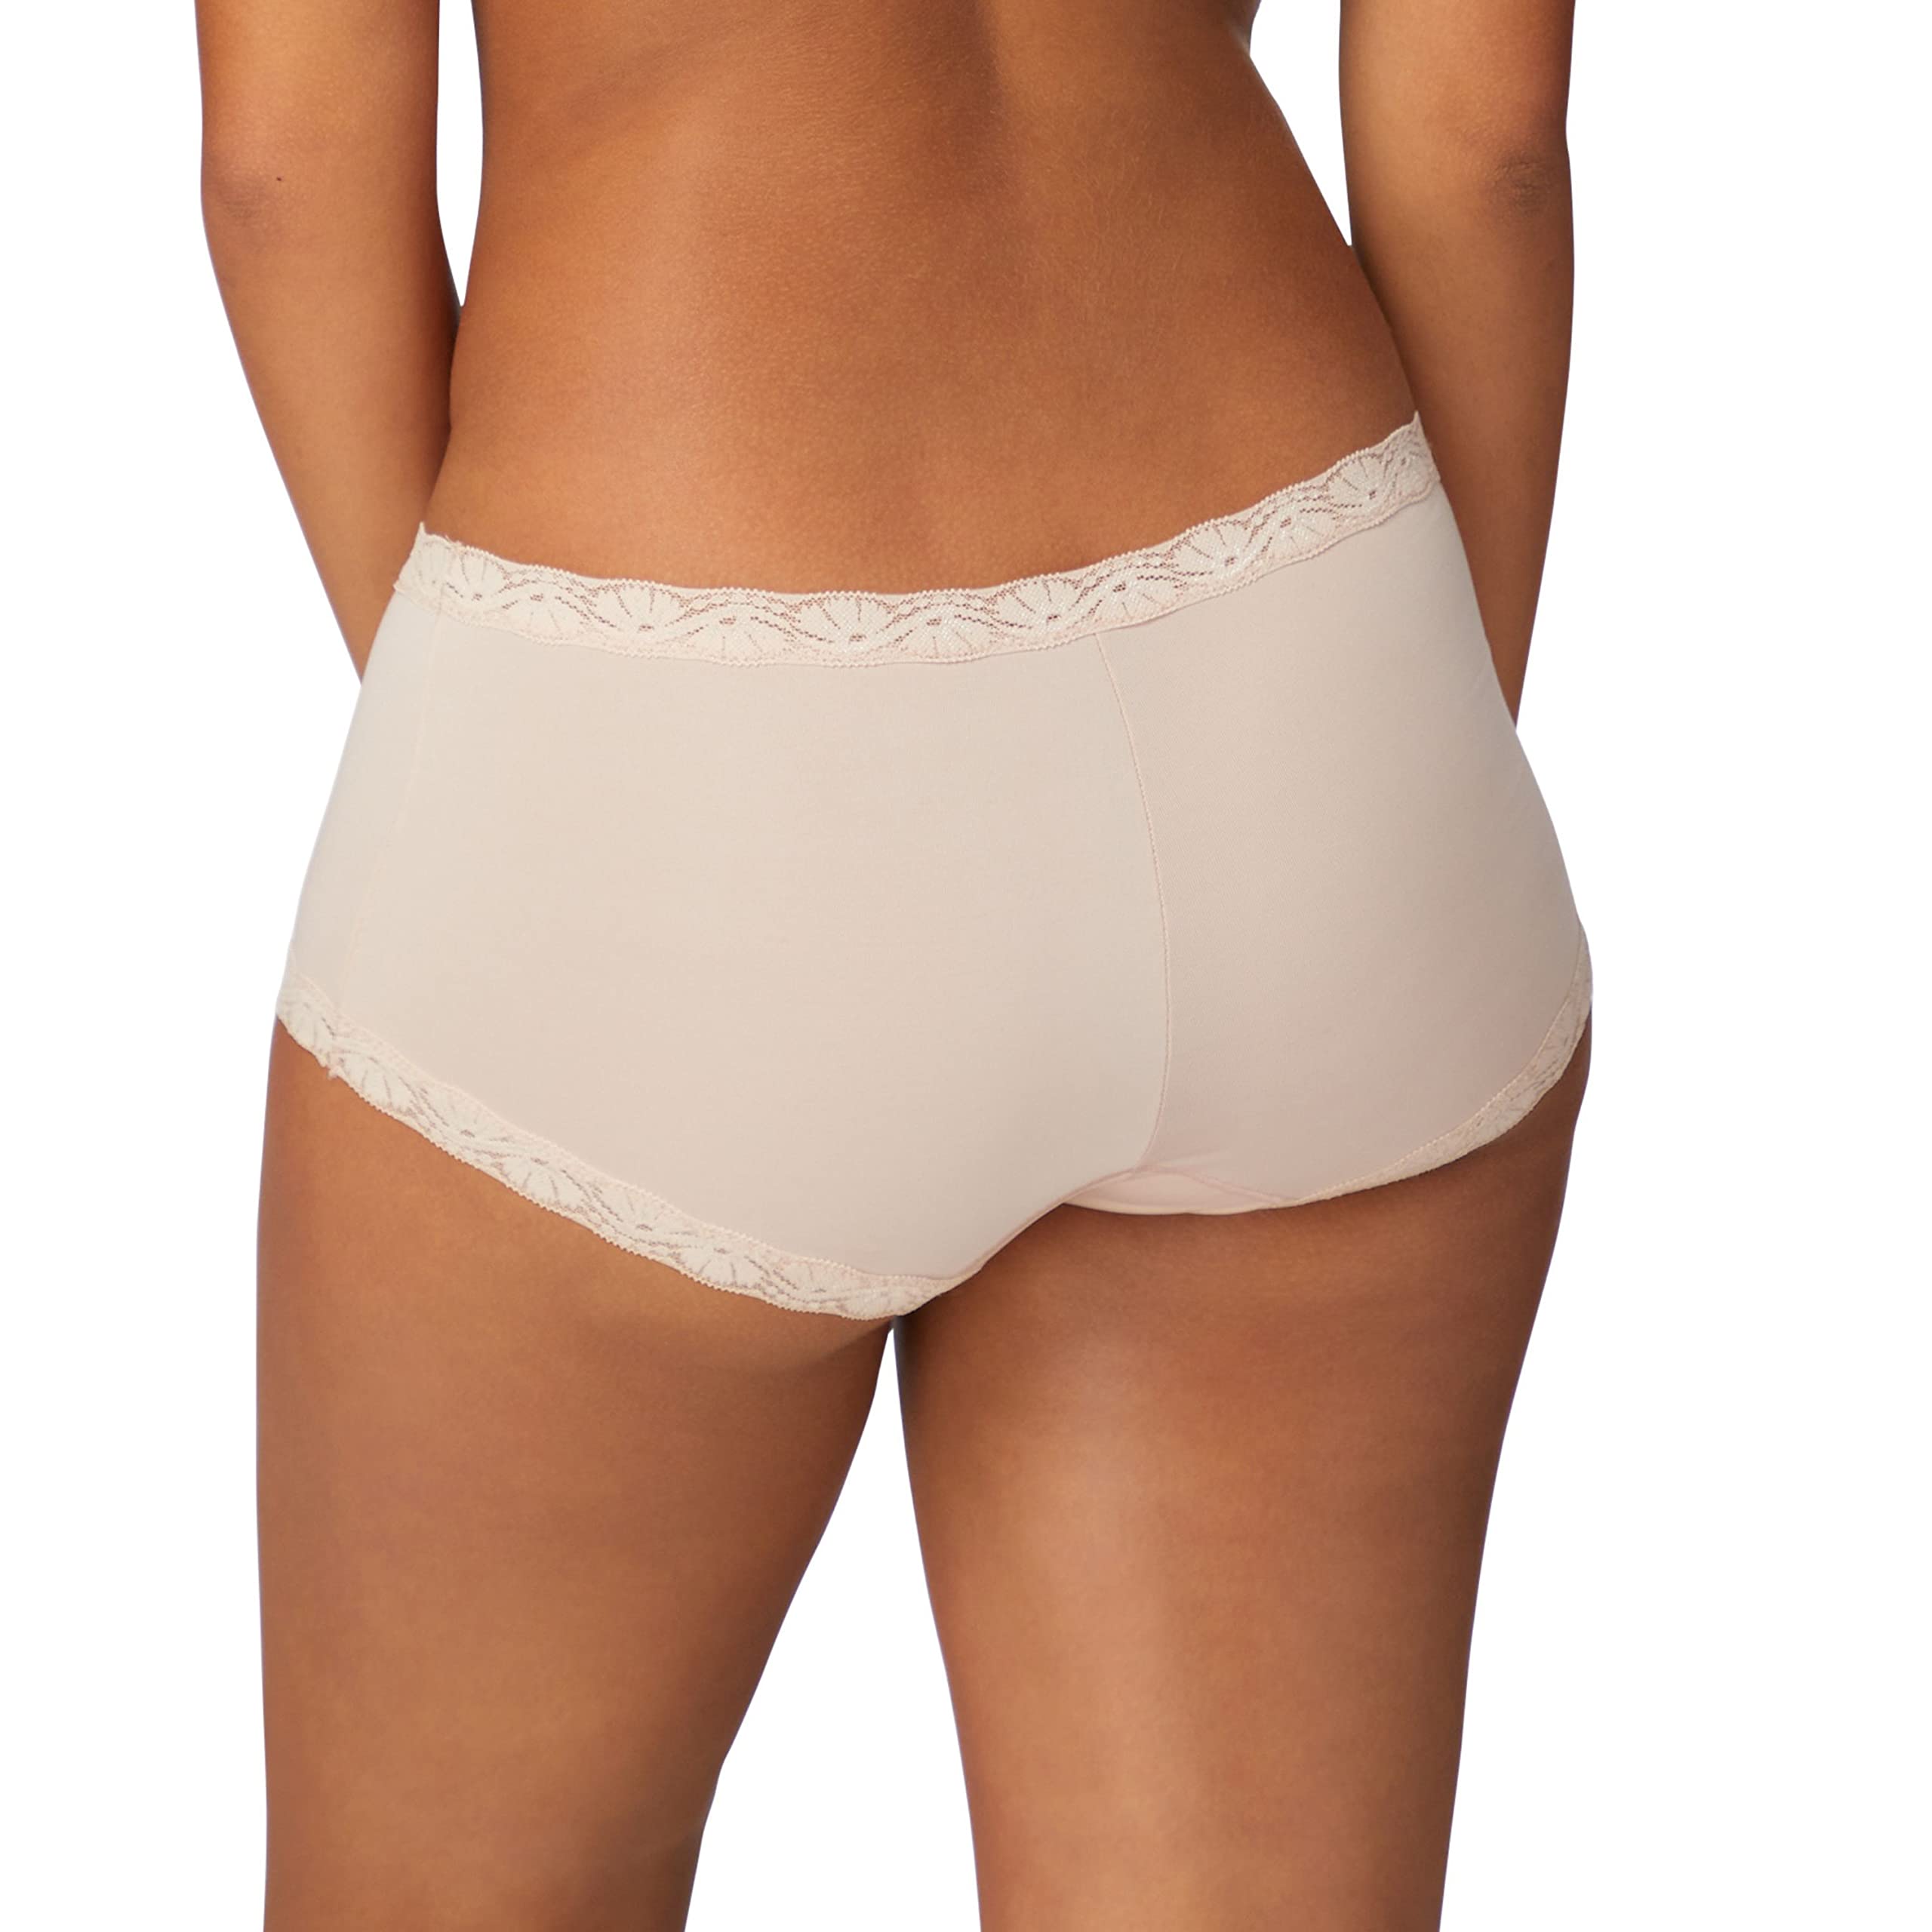 Maidenform womens Microfiber Boyshort Panty Pack, One Fab Fit Boyshort Panties With Lace, 3-pack